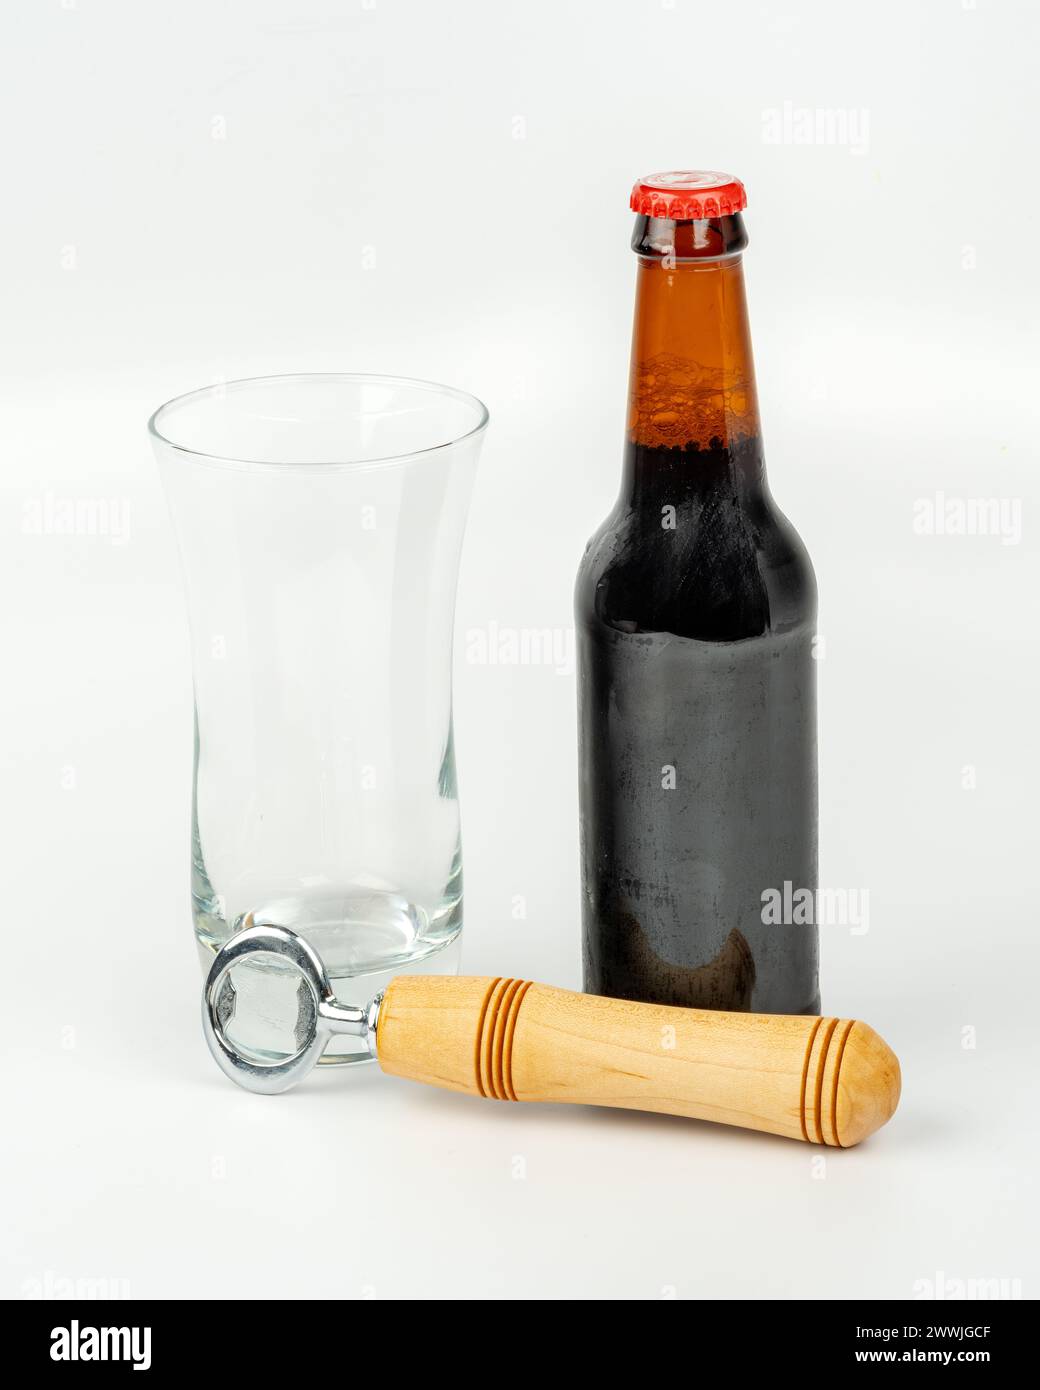 Refreshing bottle of been with glass and opener Stock Photo